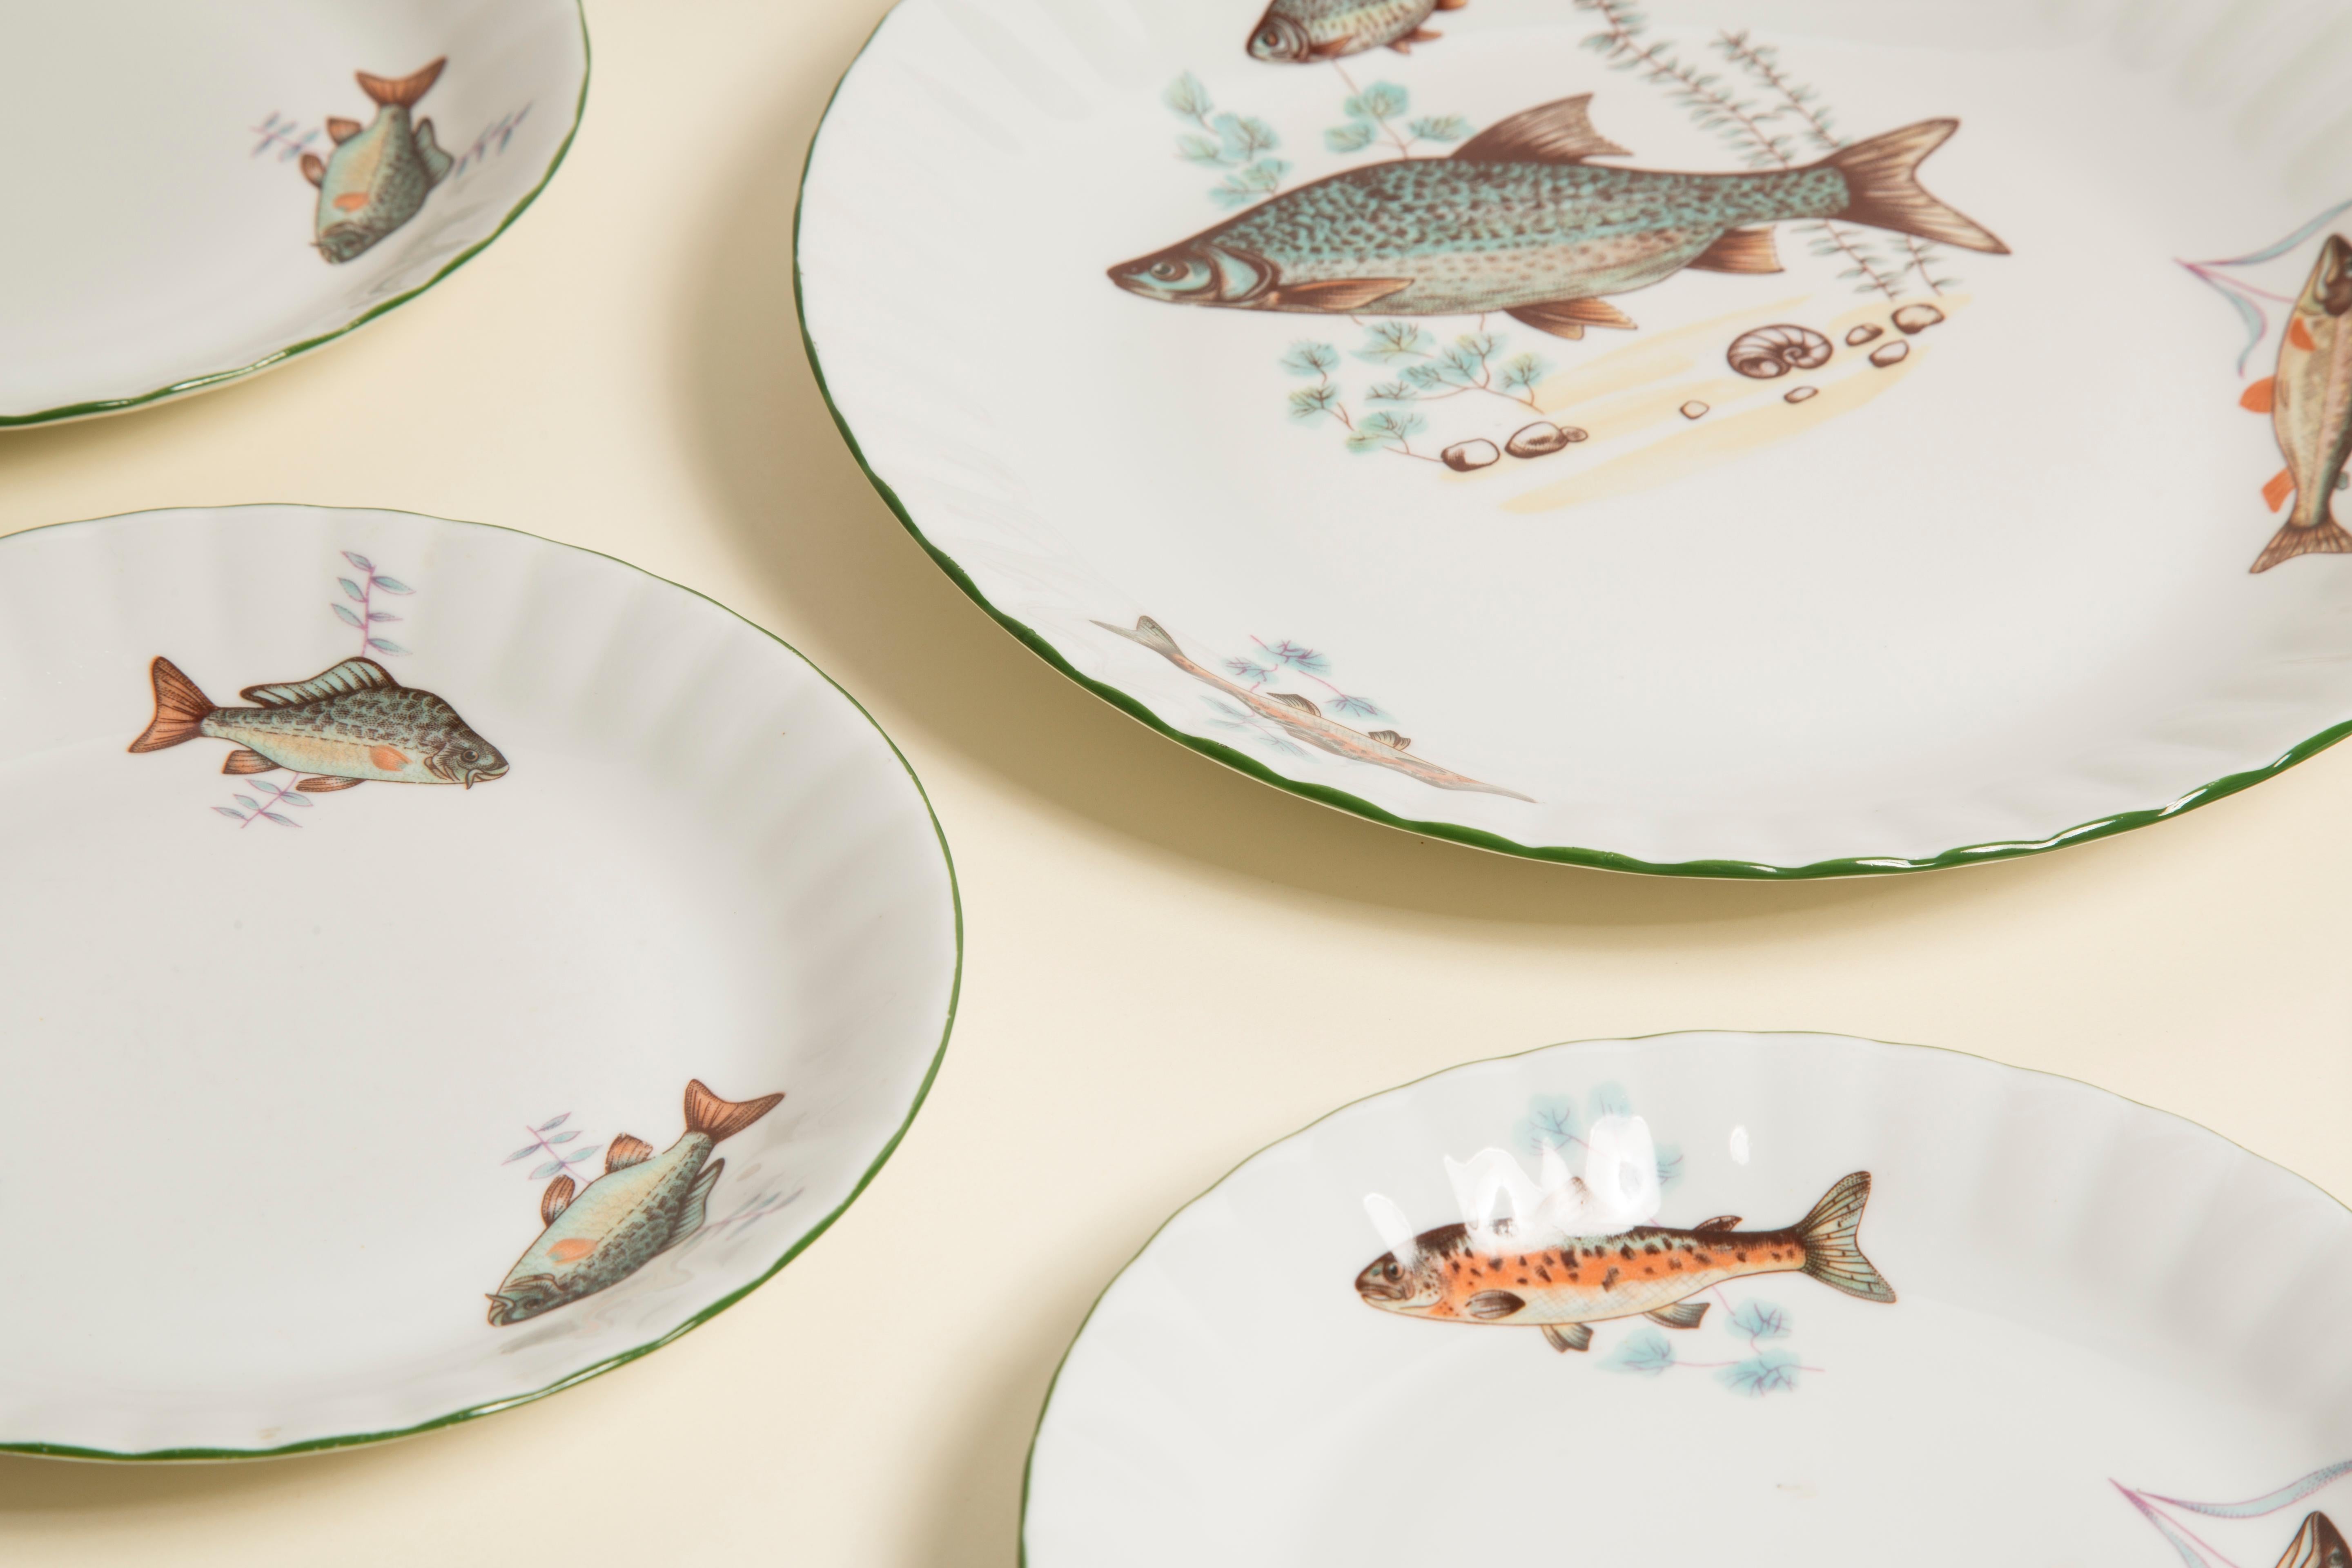 Set of Decorative Fishes plates from Poland. Produced in 1970s.
Every plate is hand painted. Plates are in very good vintage condition, no damage or cracks. Original glass. Beautiful pieces for every interior! Only one unique set.